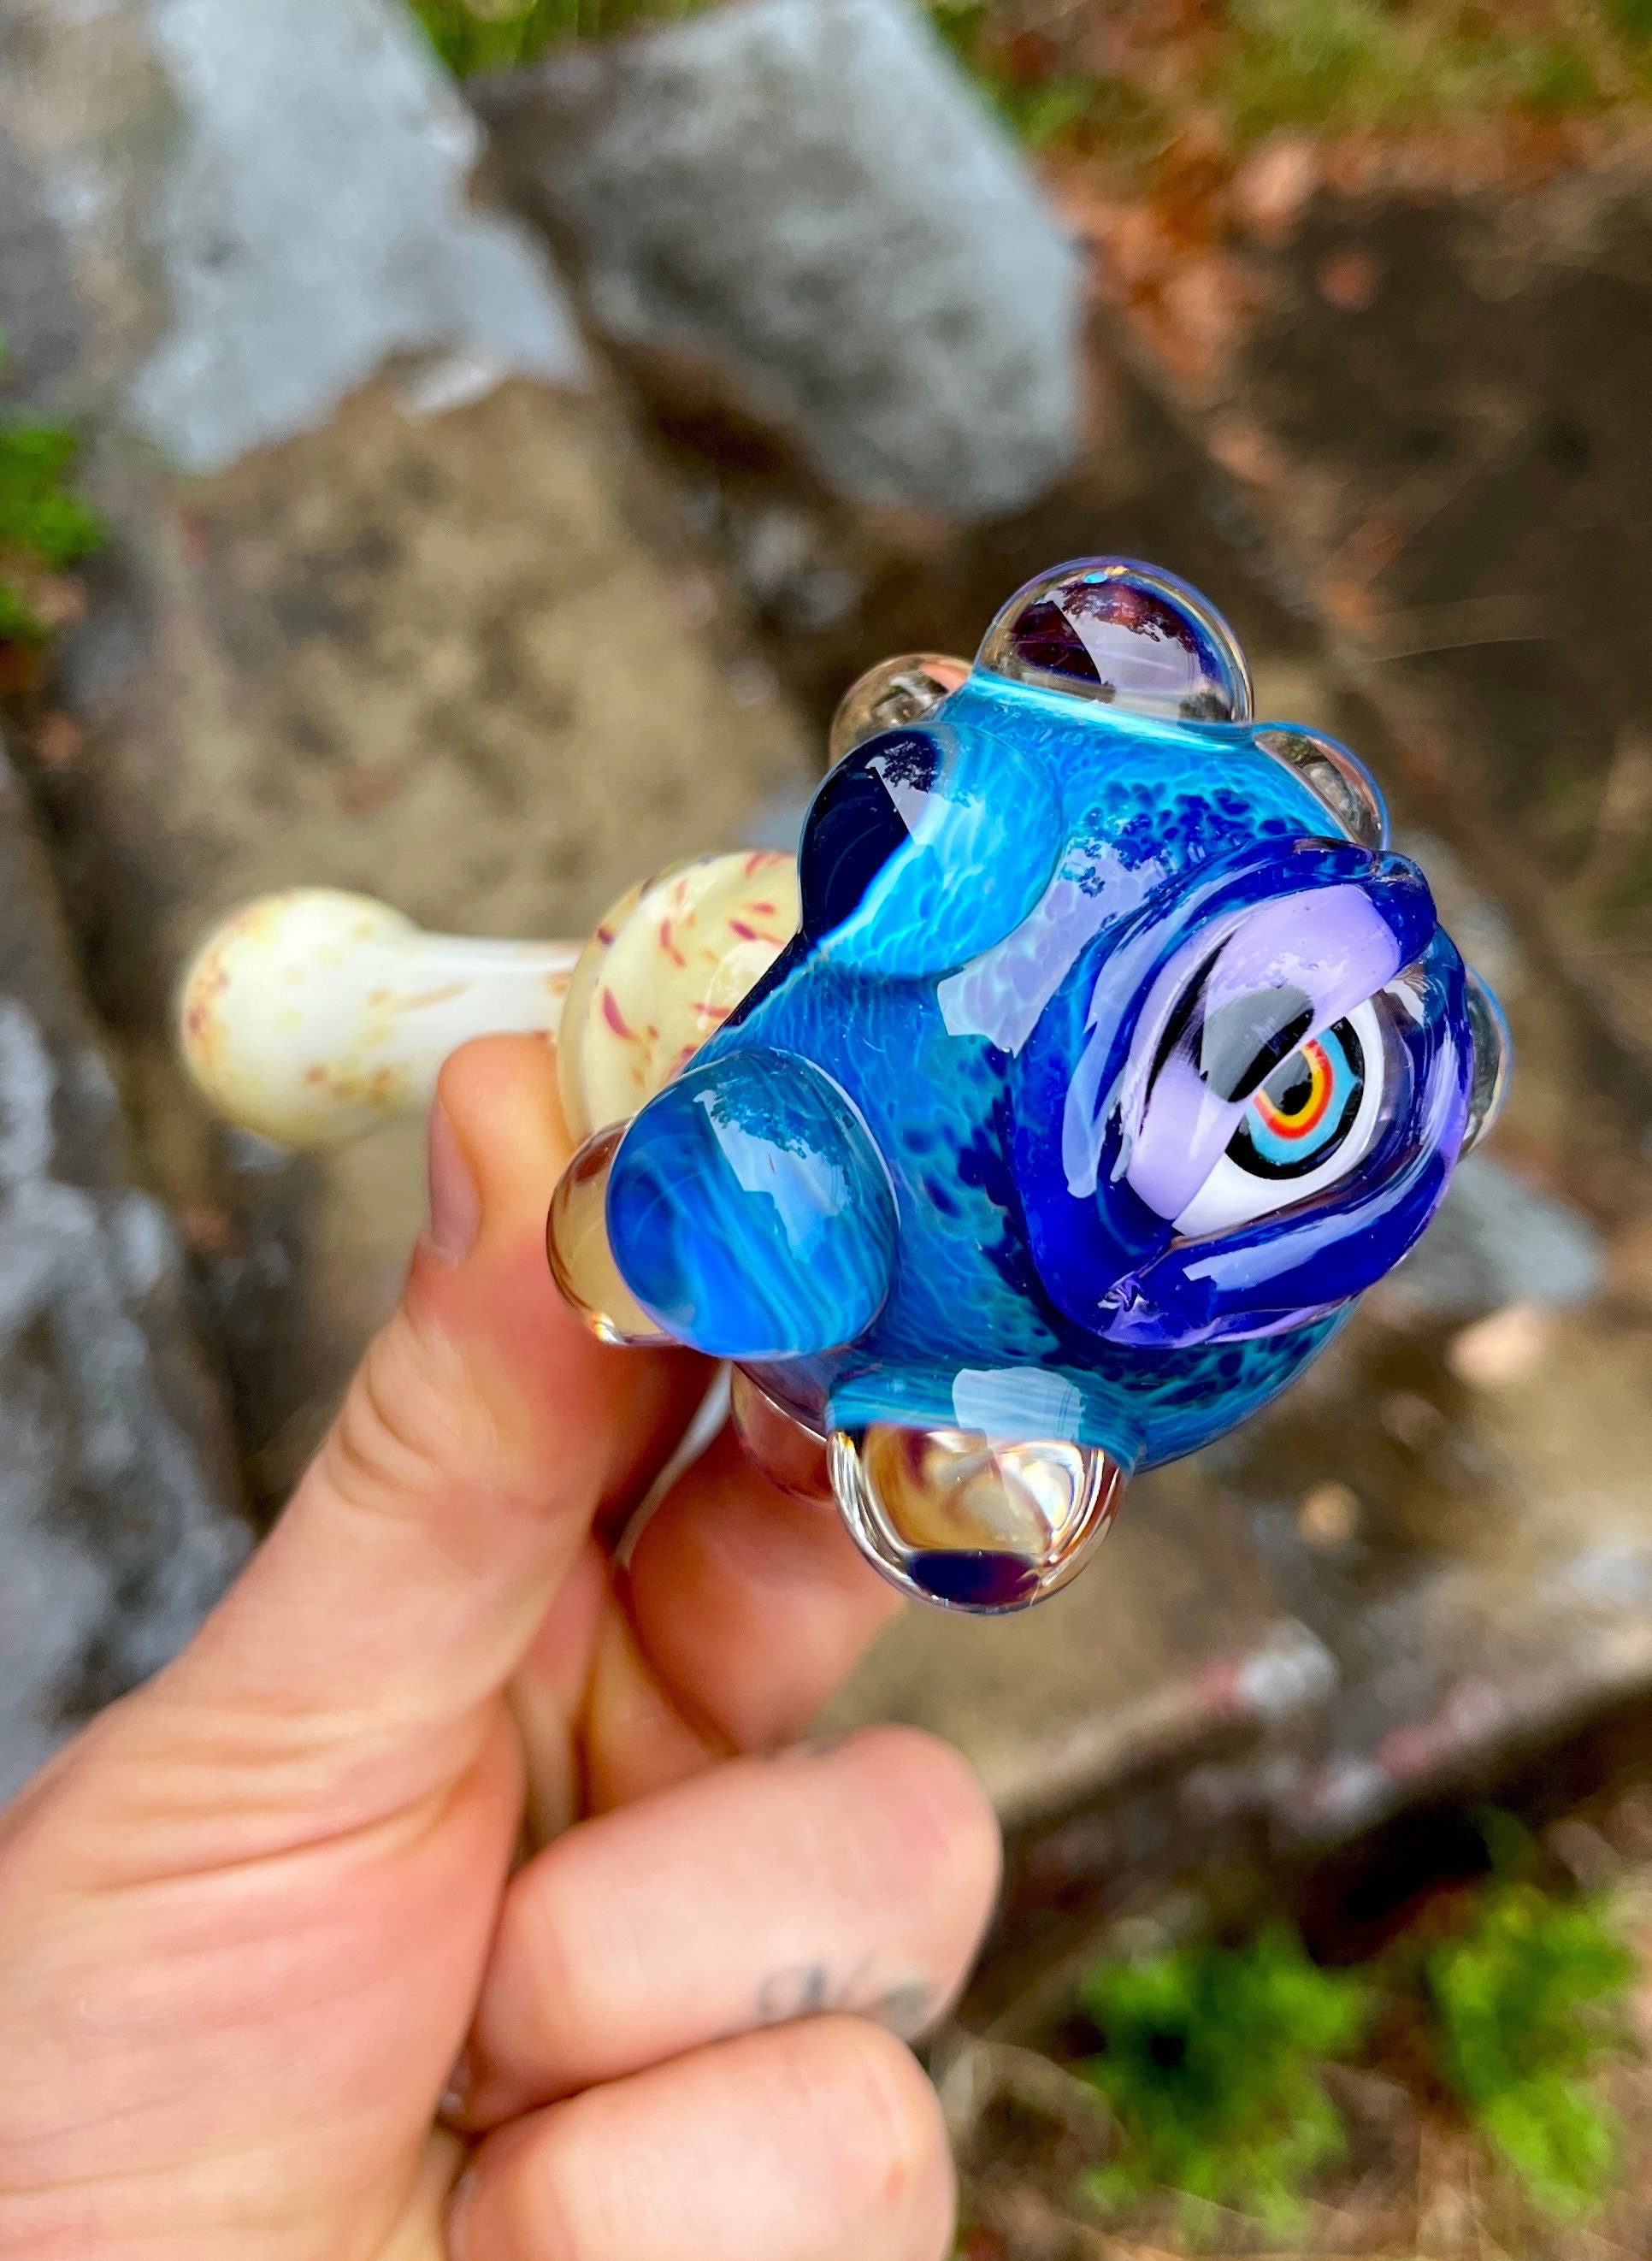 4 1/2 MIDNIGHT RUNNER Tobacco Smoking Glass Pipe Bowl THICK GLASS Pip –  The Hippie Momma Shop